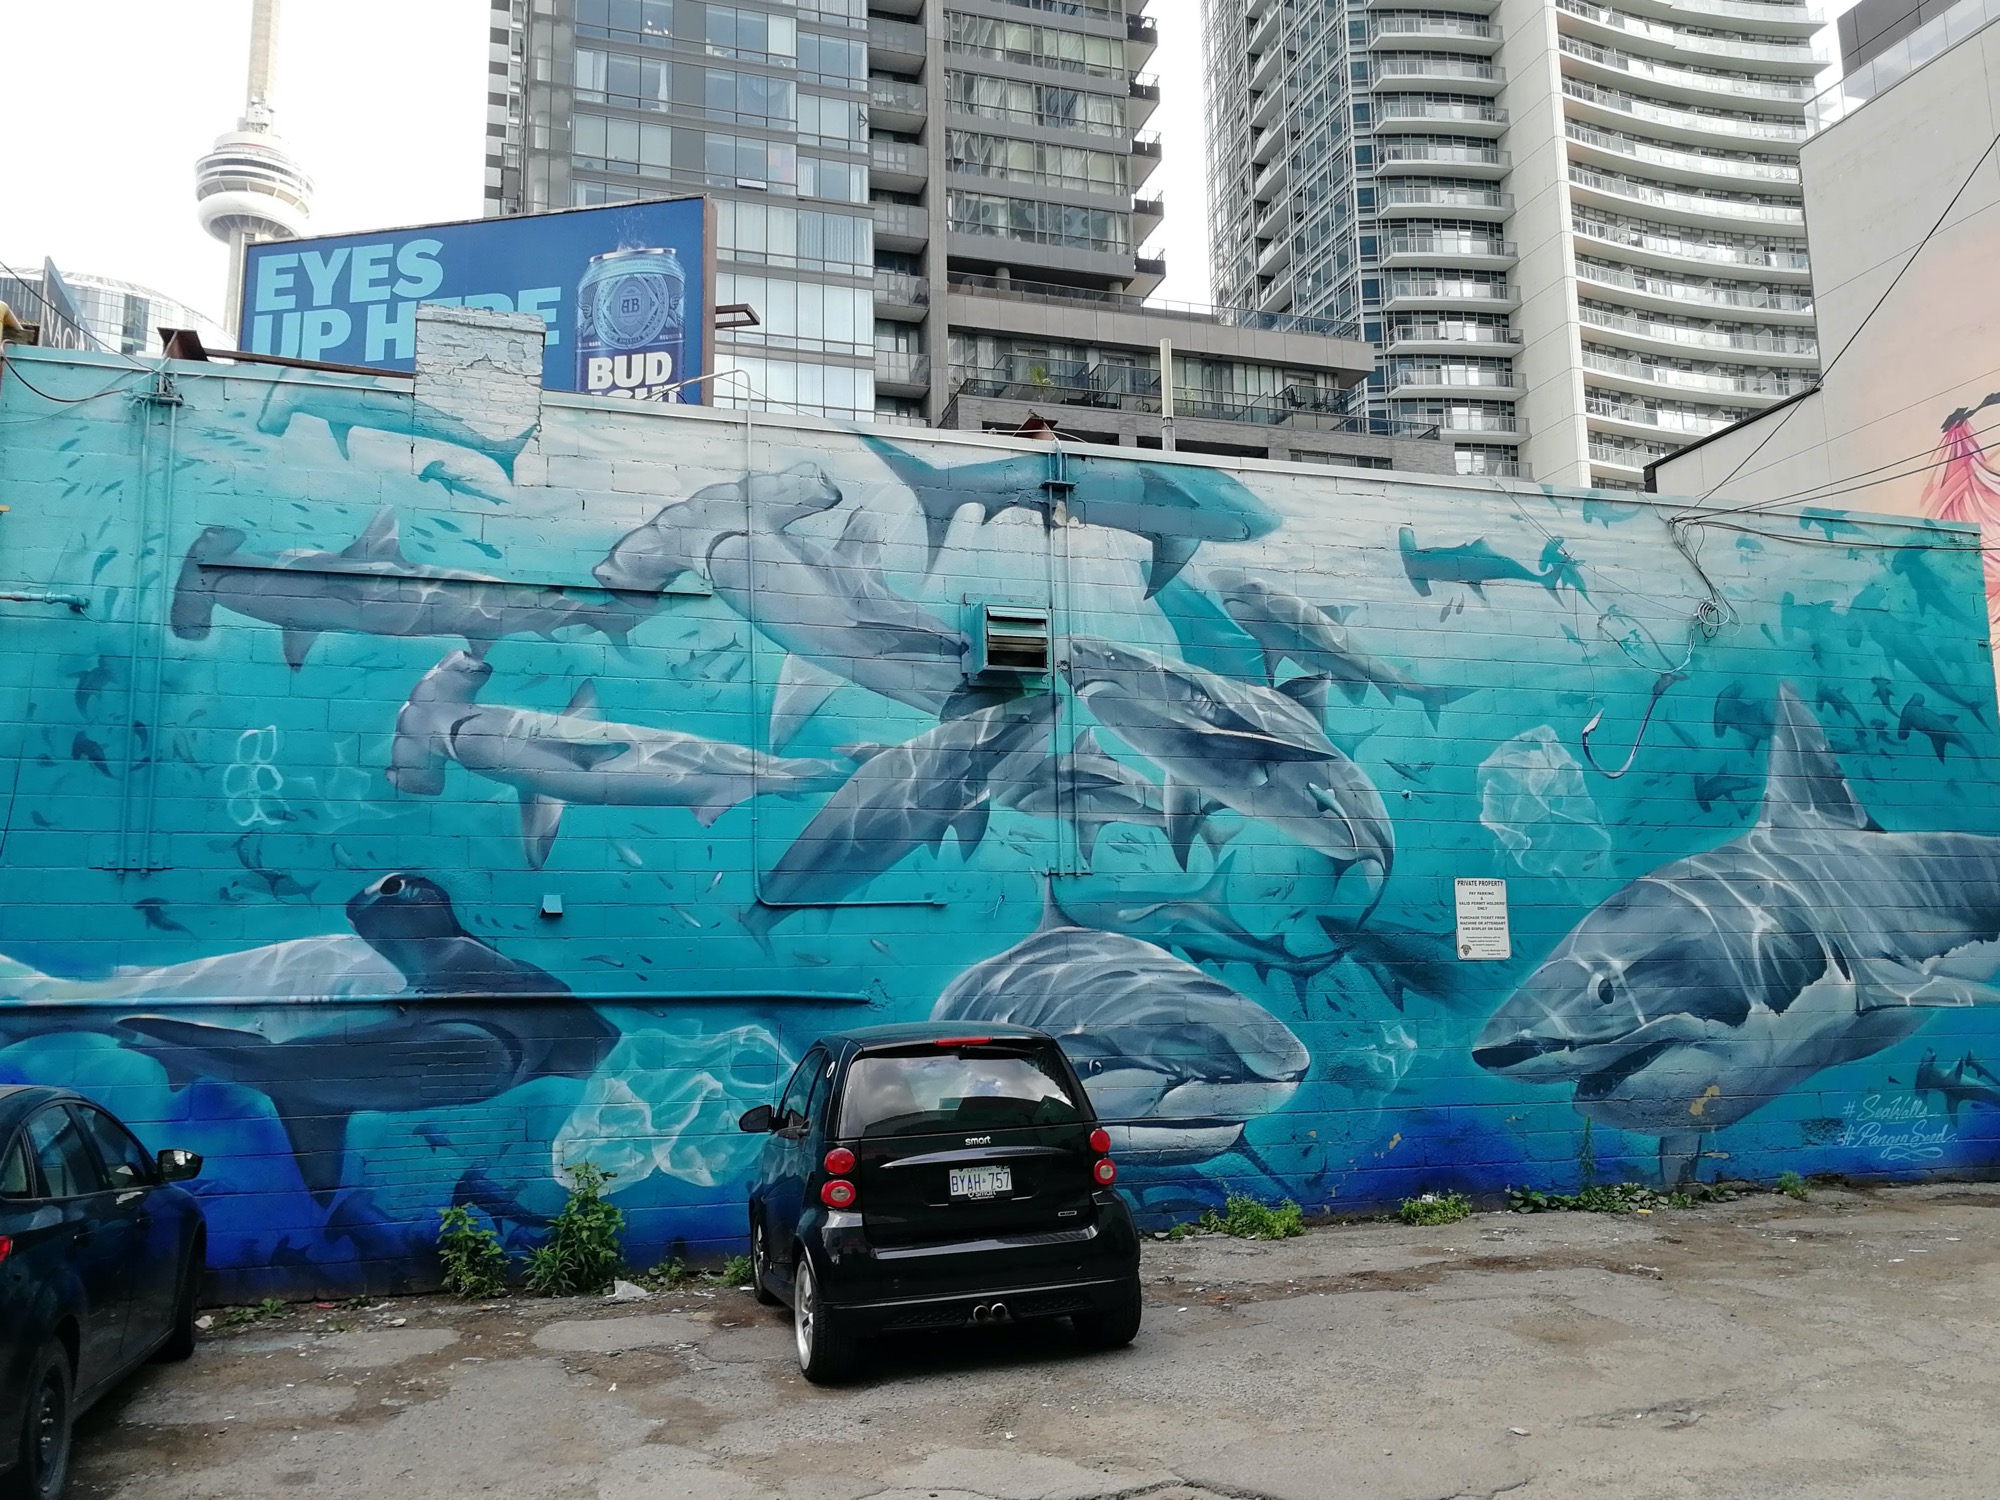 Graffiti 3209  captured by Rabot in Toronto Canada